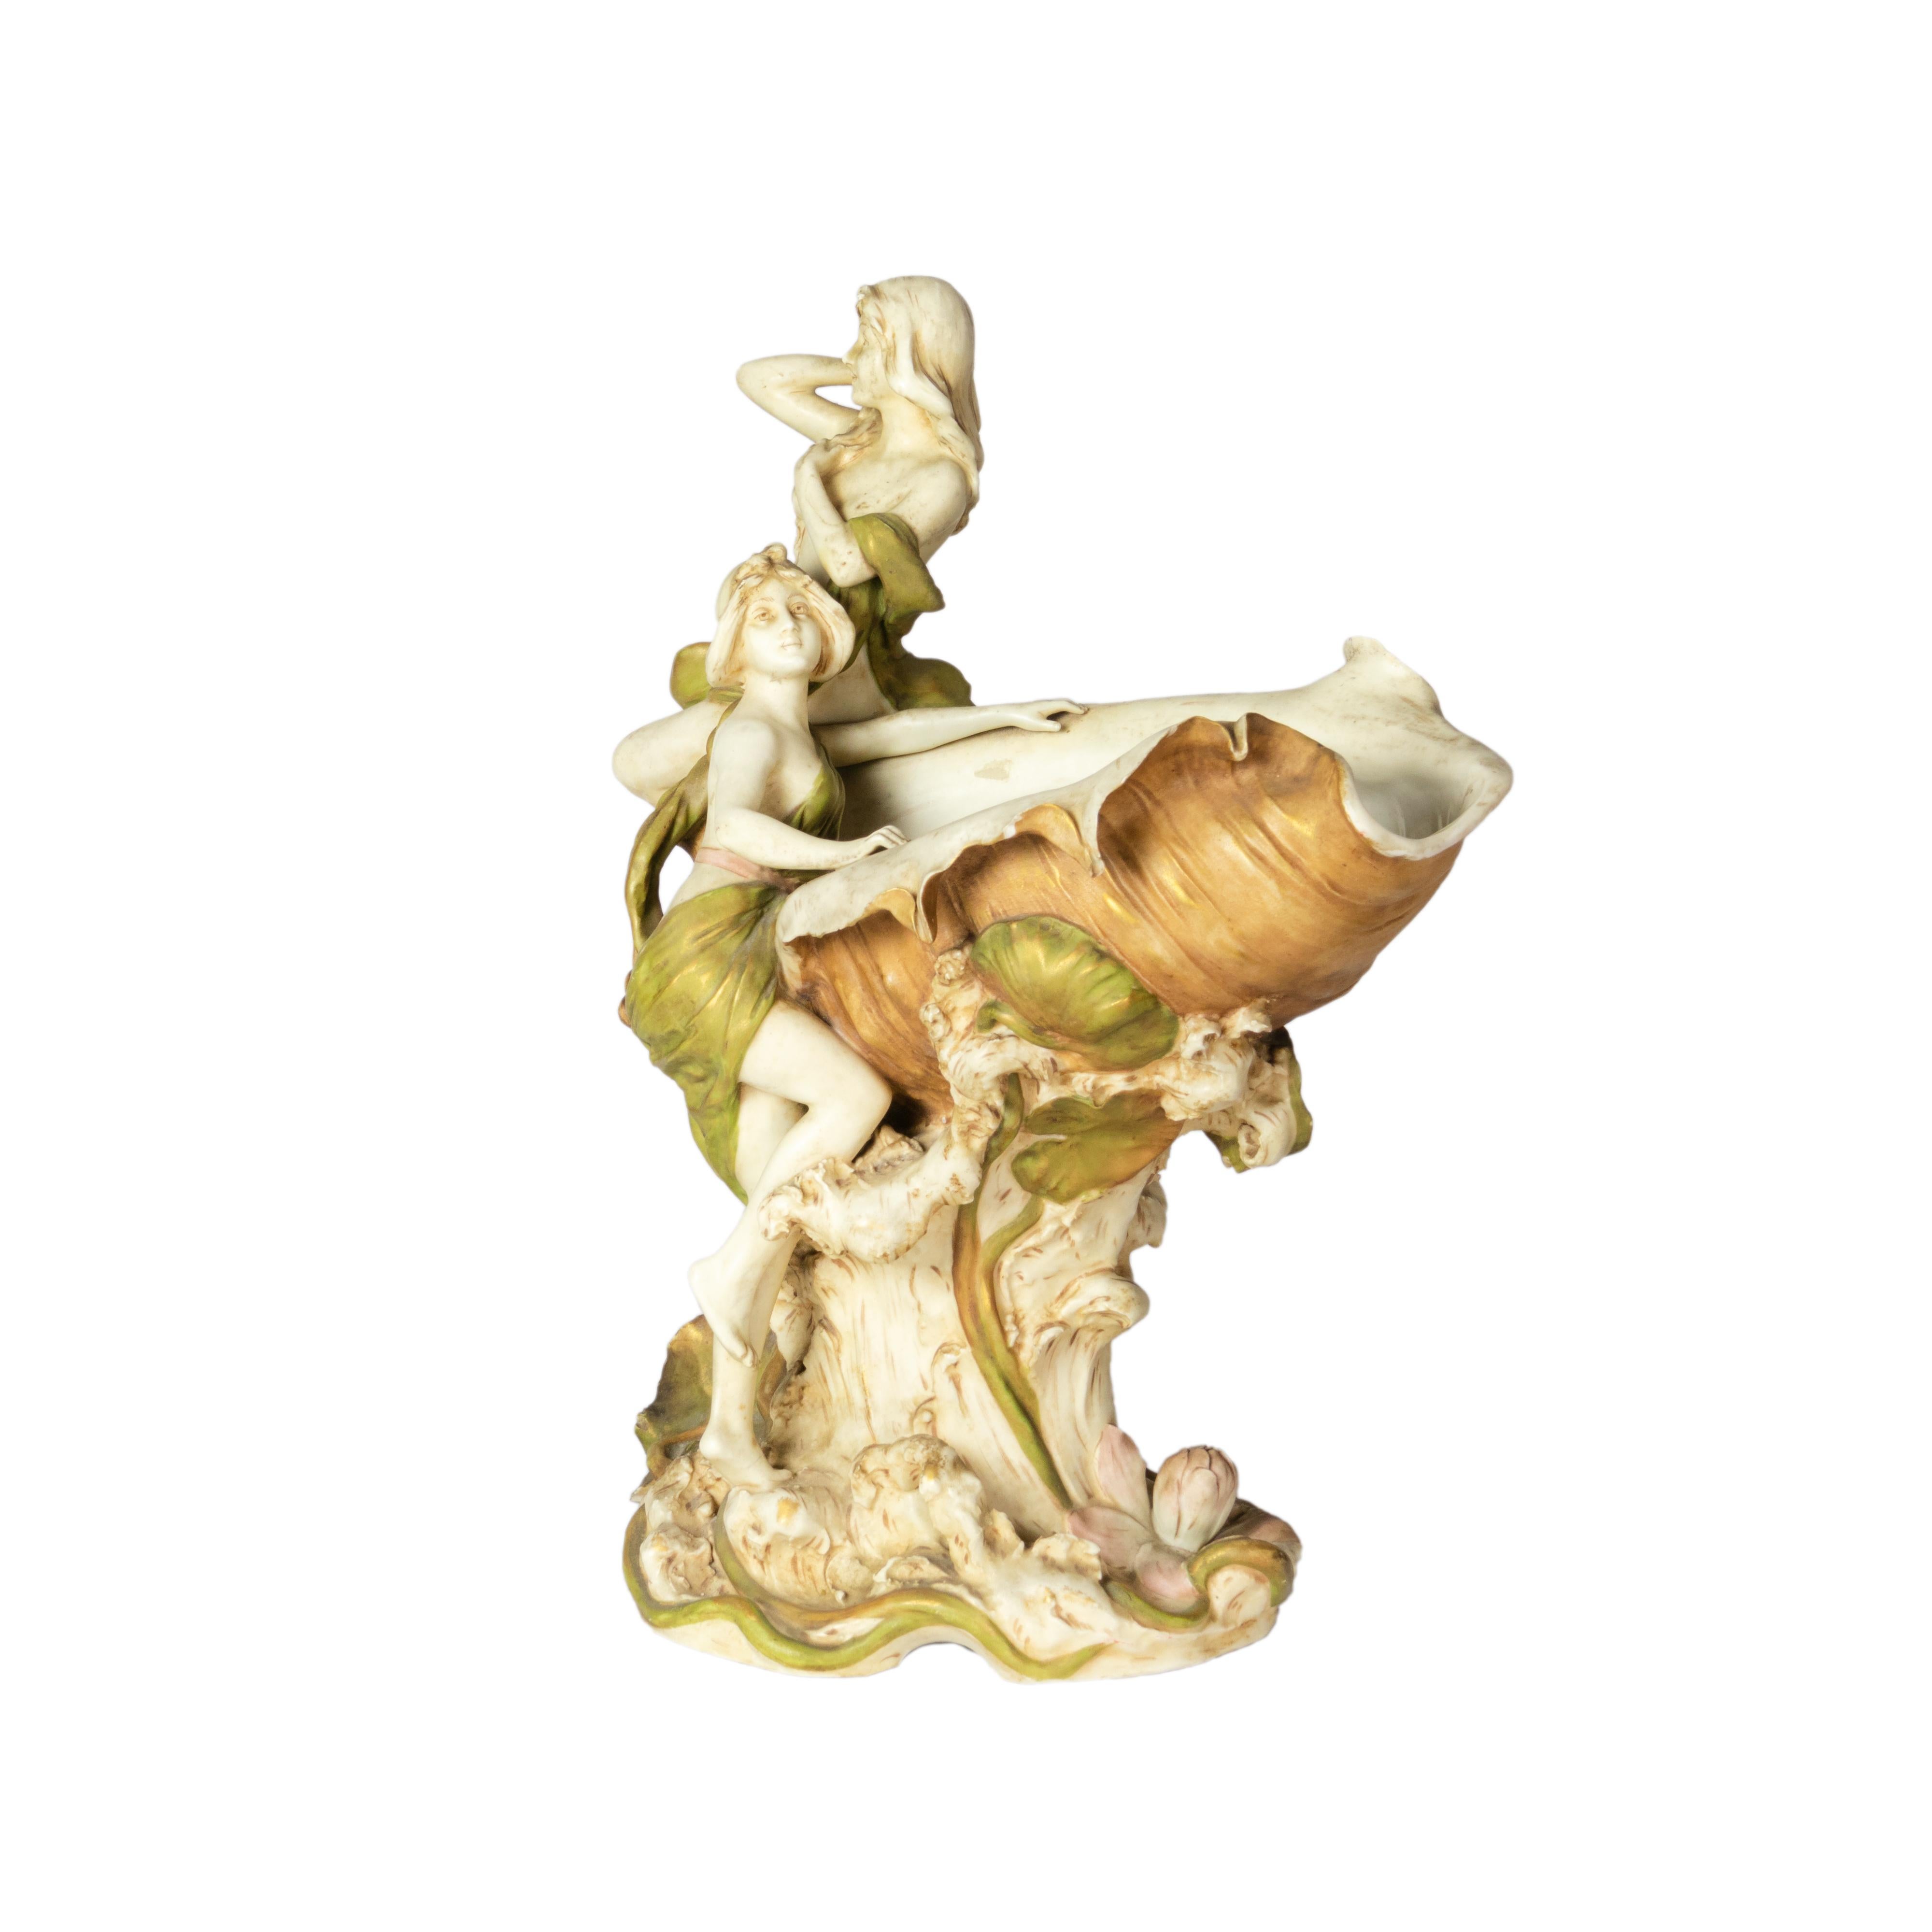 20th Century Austria Vase conch shell by Royal Duxer Scessesion, 1900 For Sale